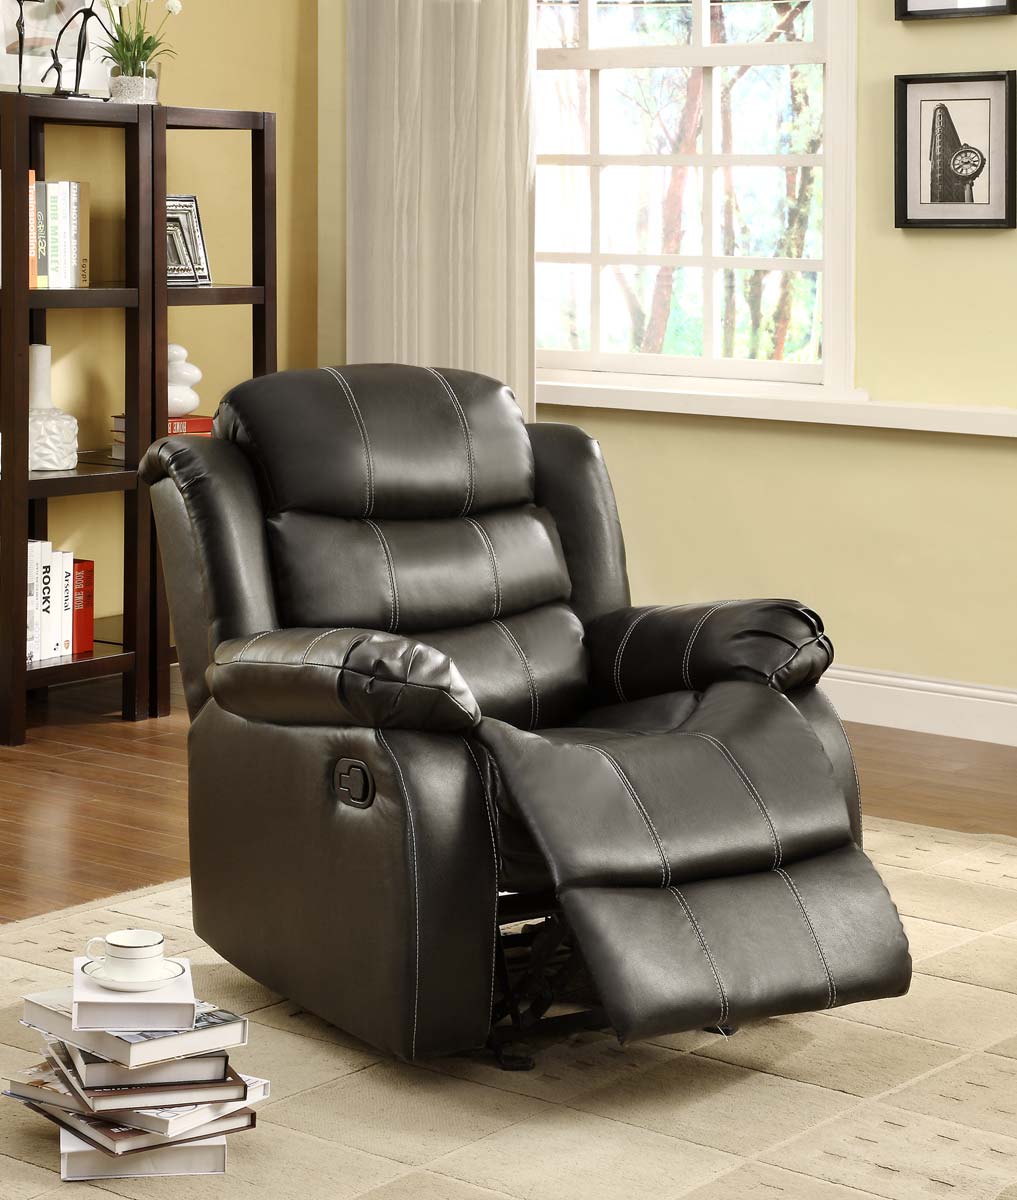 Homelegance Smithee Chair Glider Recliner - Black - Bonded Leather Match